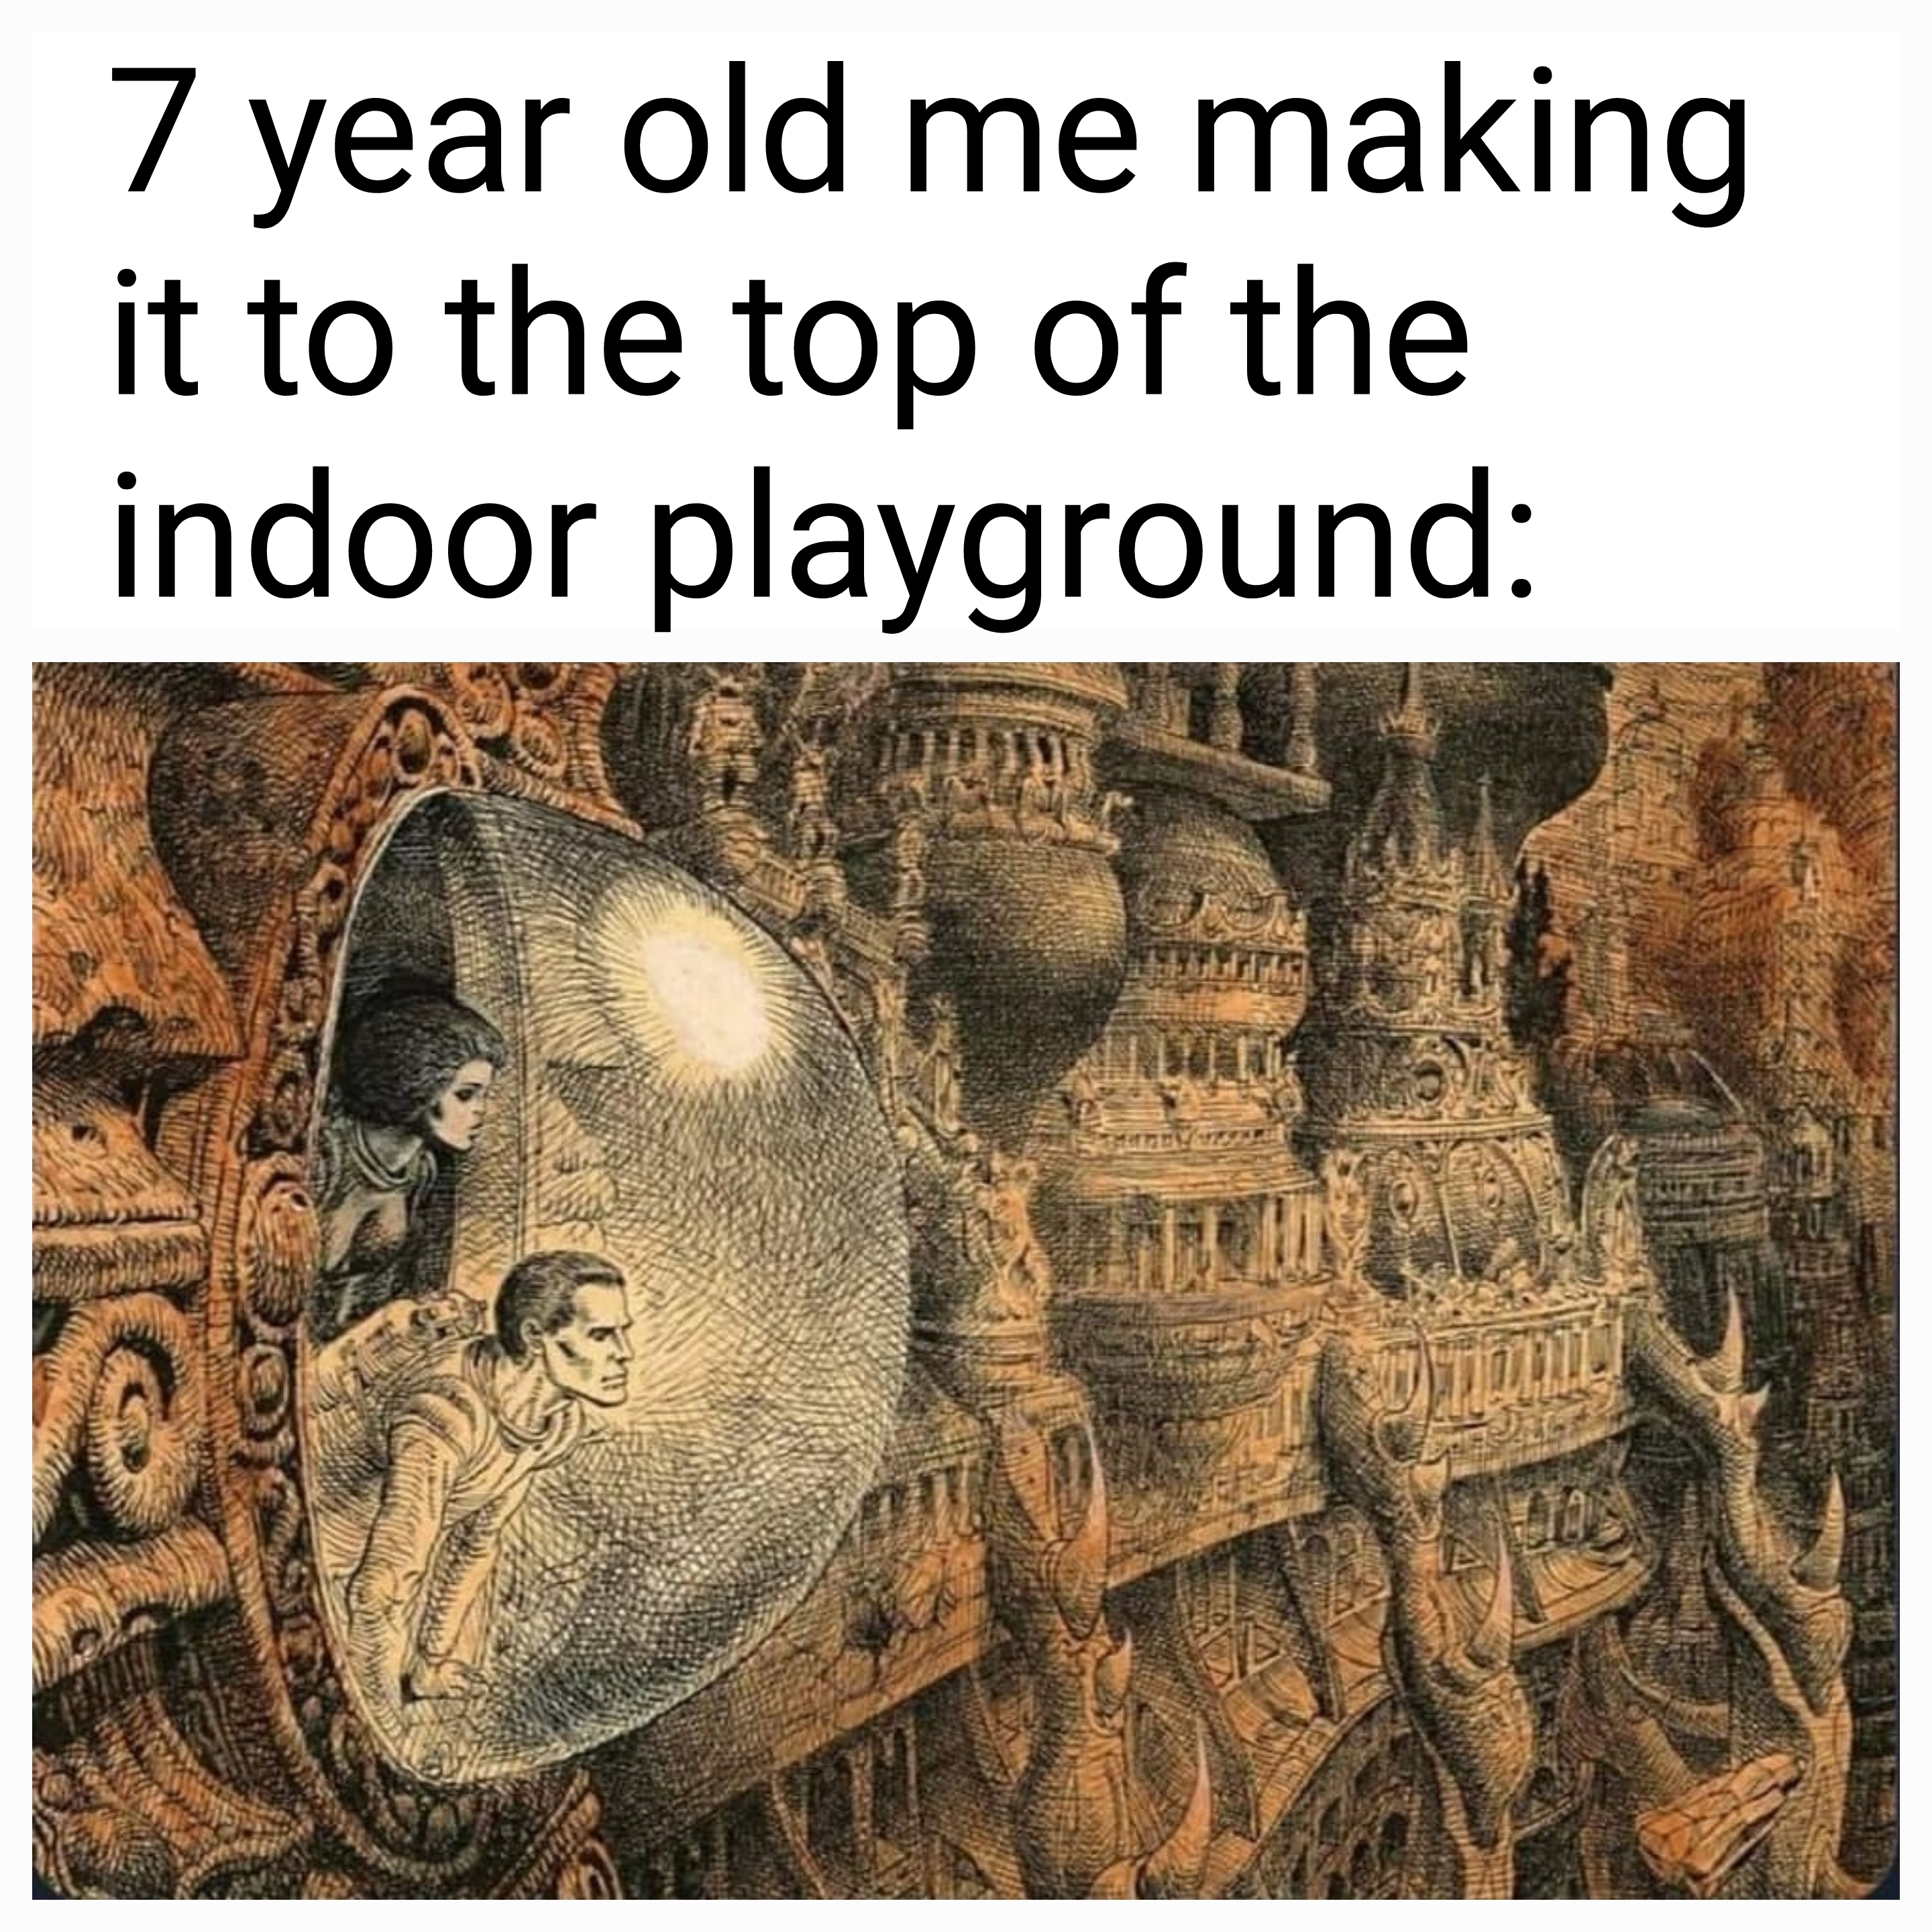 funny memes and pics - archaeological site - 7 year old me making it to the top of the indoor playground